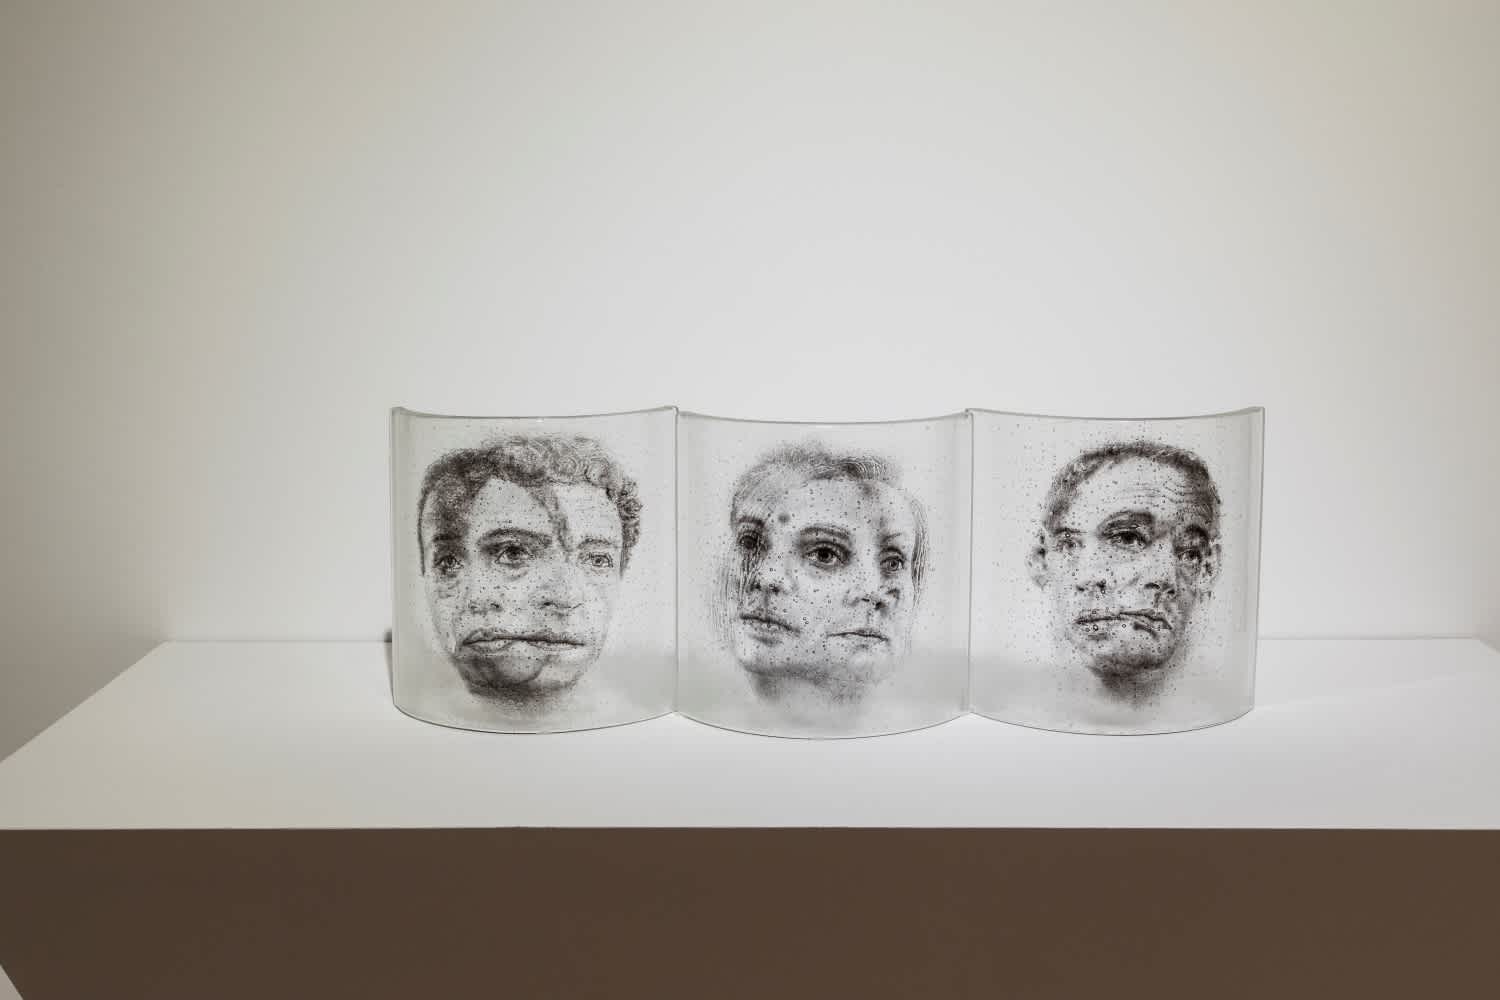 Image of Michael Janis, My Other Self: Sanctuary. Three see-through glass objects sit on a white pedestal. The glass holds black images of mirror-like portraits. 